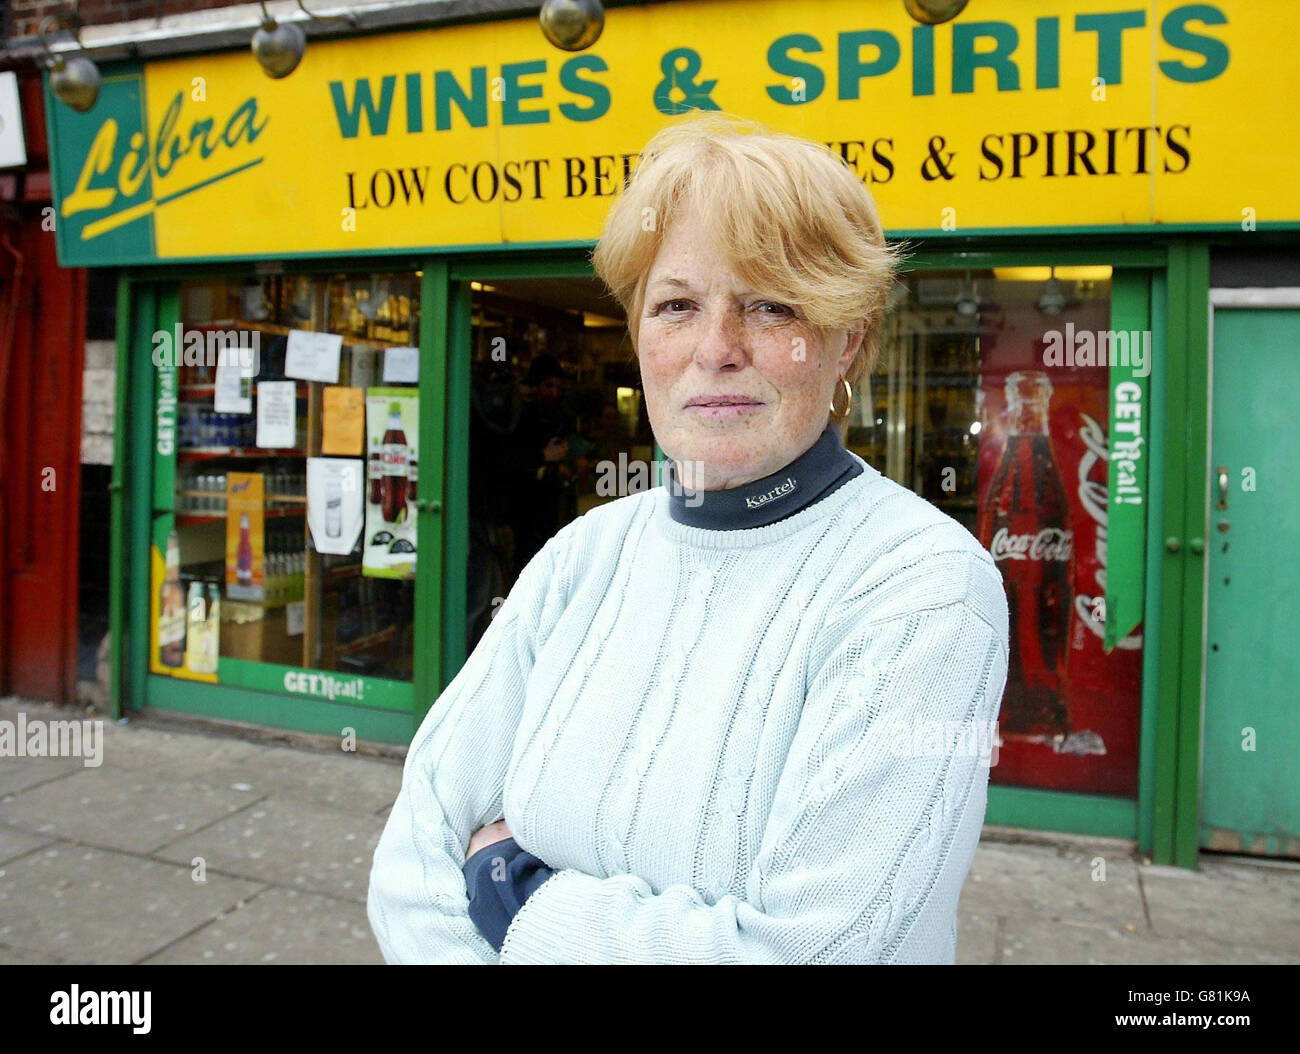 Irene Kermode, outside her Libra off licence shop in Manchester. Ms Kermode was told by Mersyside Police to investigate a robbery which took place at her shop. Two police officers were caught on CCTV telling staff at the off licence in Liverpool to talk to the suspects themselves. They were also told to watch video footage of the alleged attack and let the police know if it contained anything interesting. Stock Photo